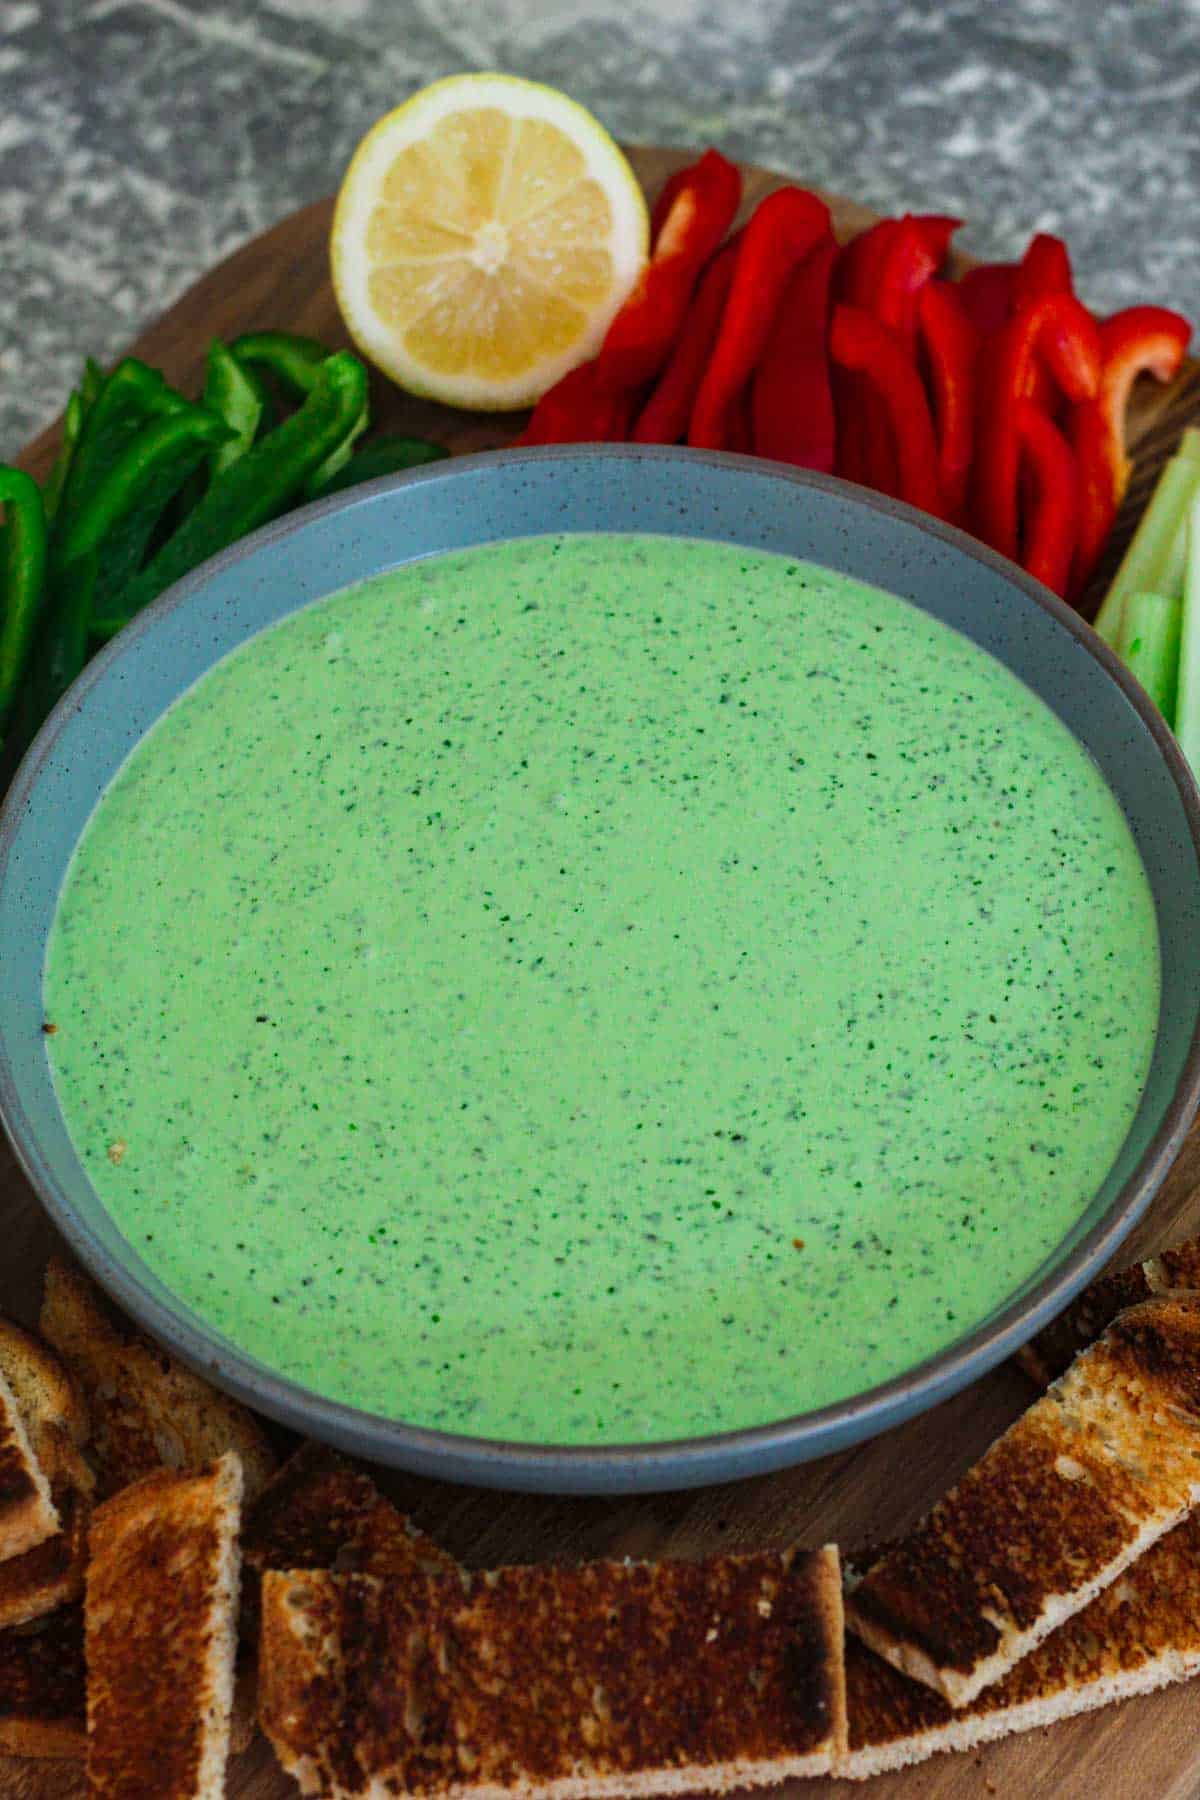 A green dip made with yogurt and herbs to create a healthy spin over the famous Green Goddess dressing. The green dip is shown in a plate, surrounded by red bell pepper strips, green bell peppers, celery, lemon, toasted sourdough bread etc. 